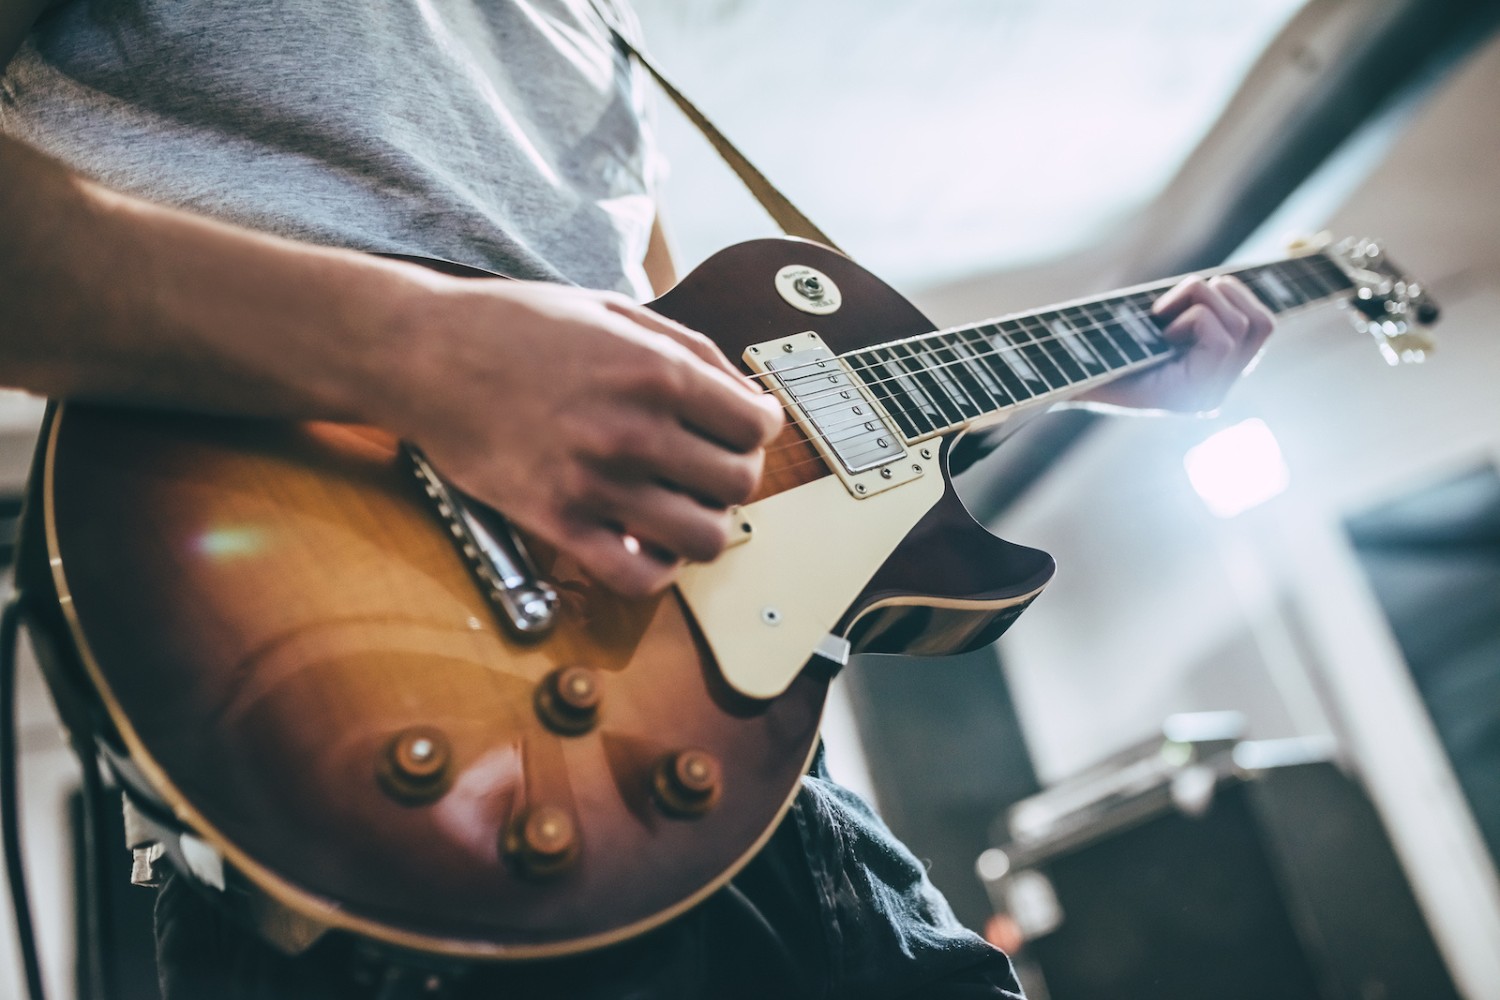 How To Use An Electric Guitar